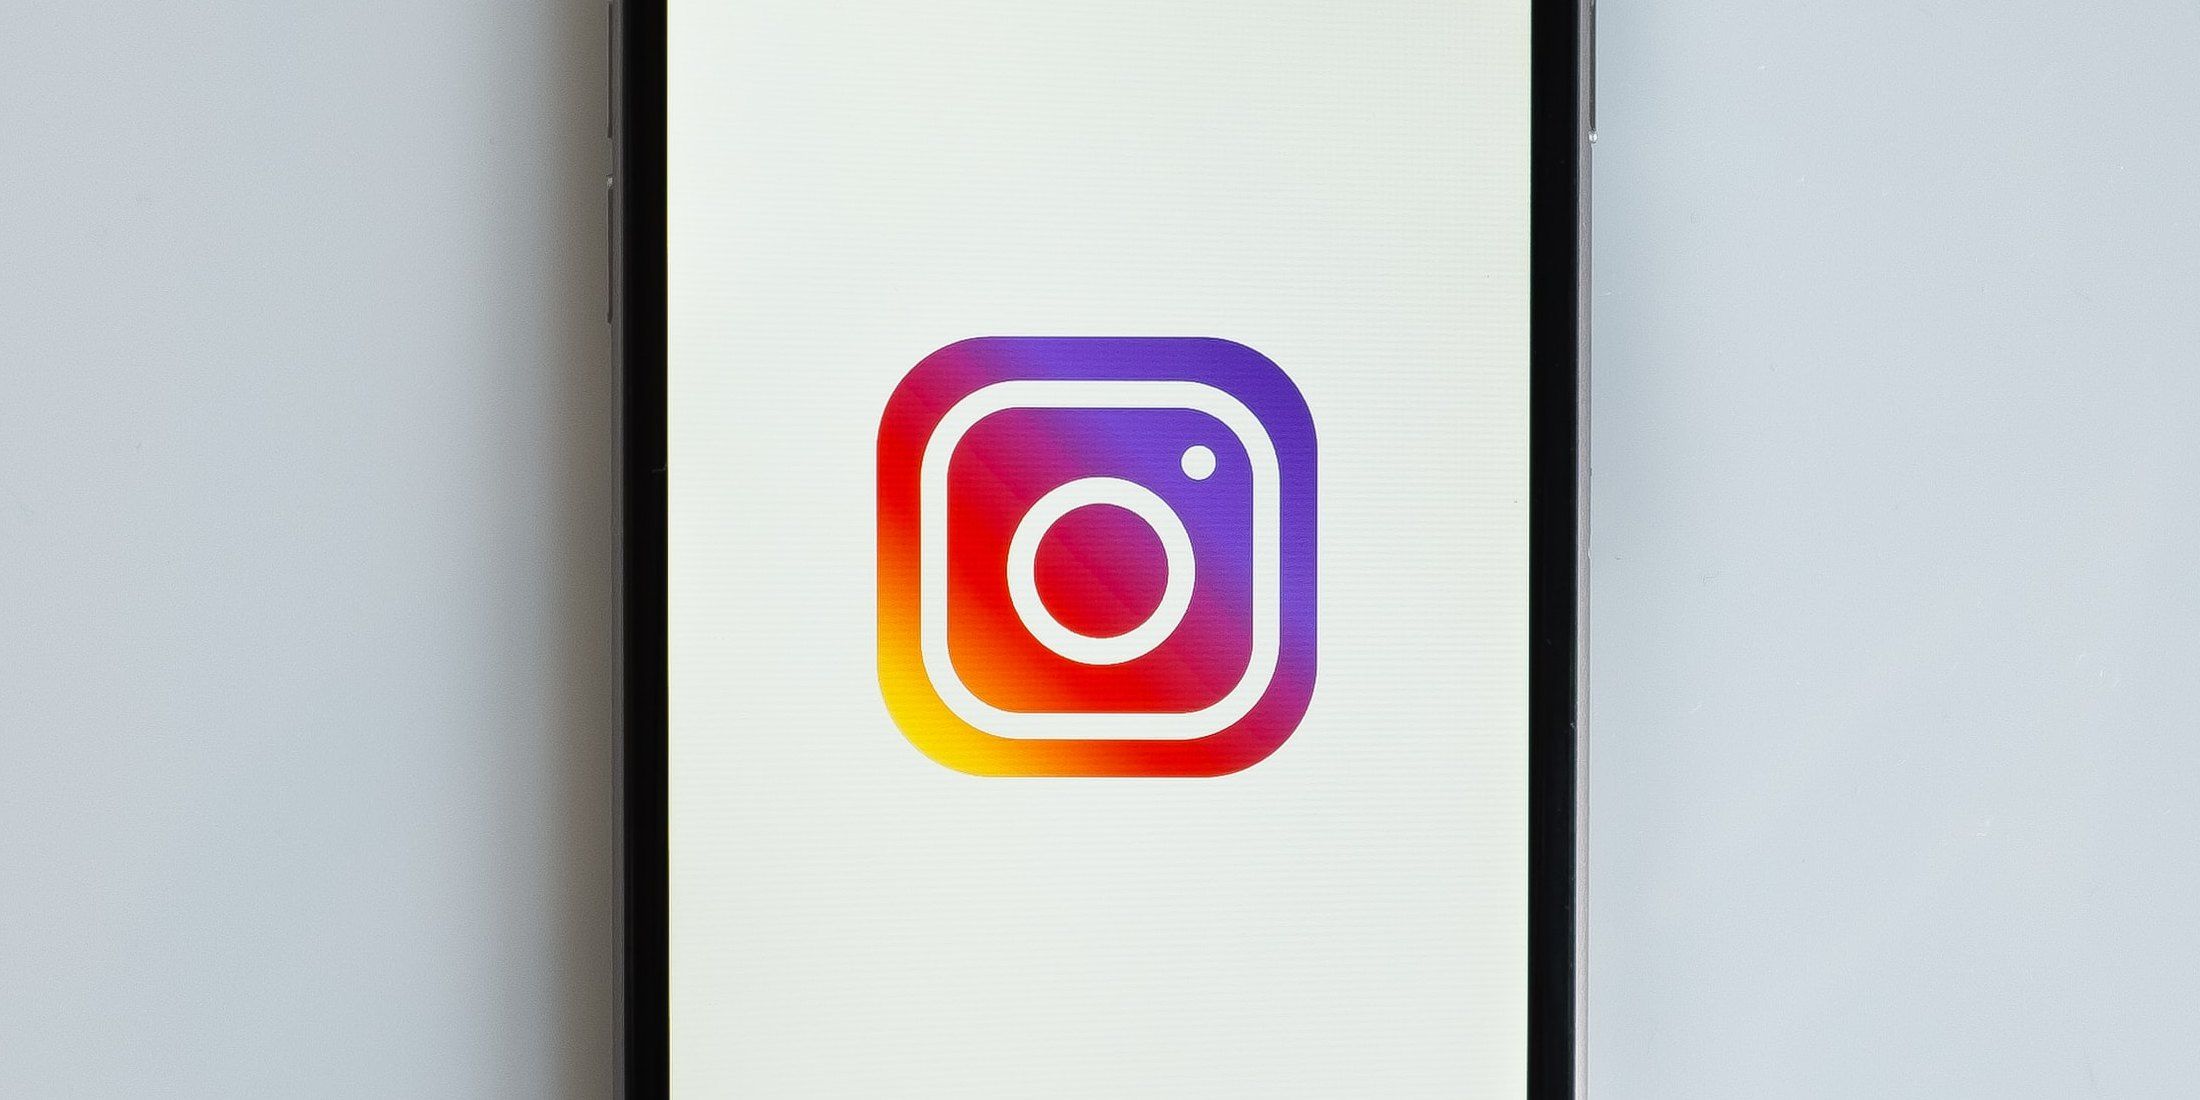 Instagram Targeted Teens And Now States Are Targeting Instagram